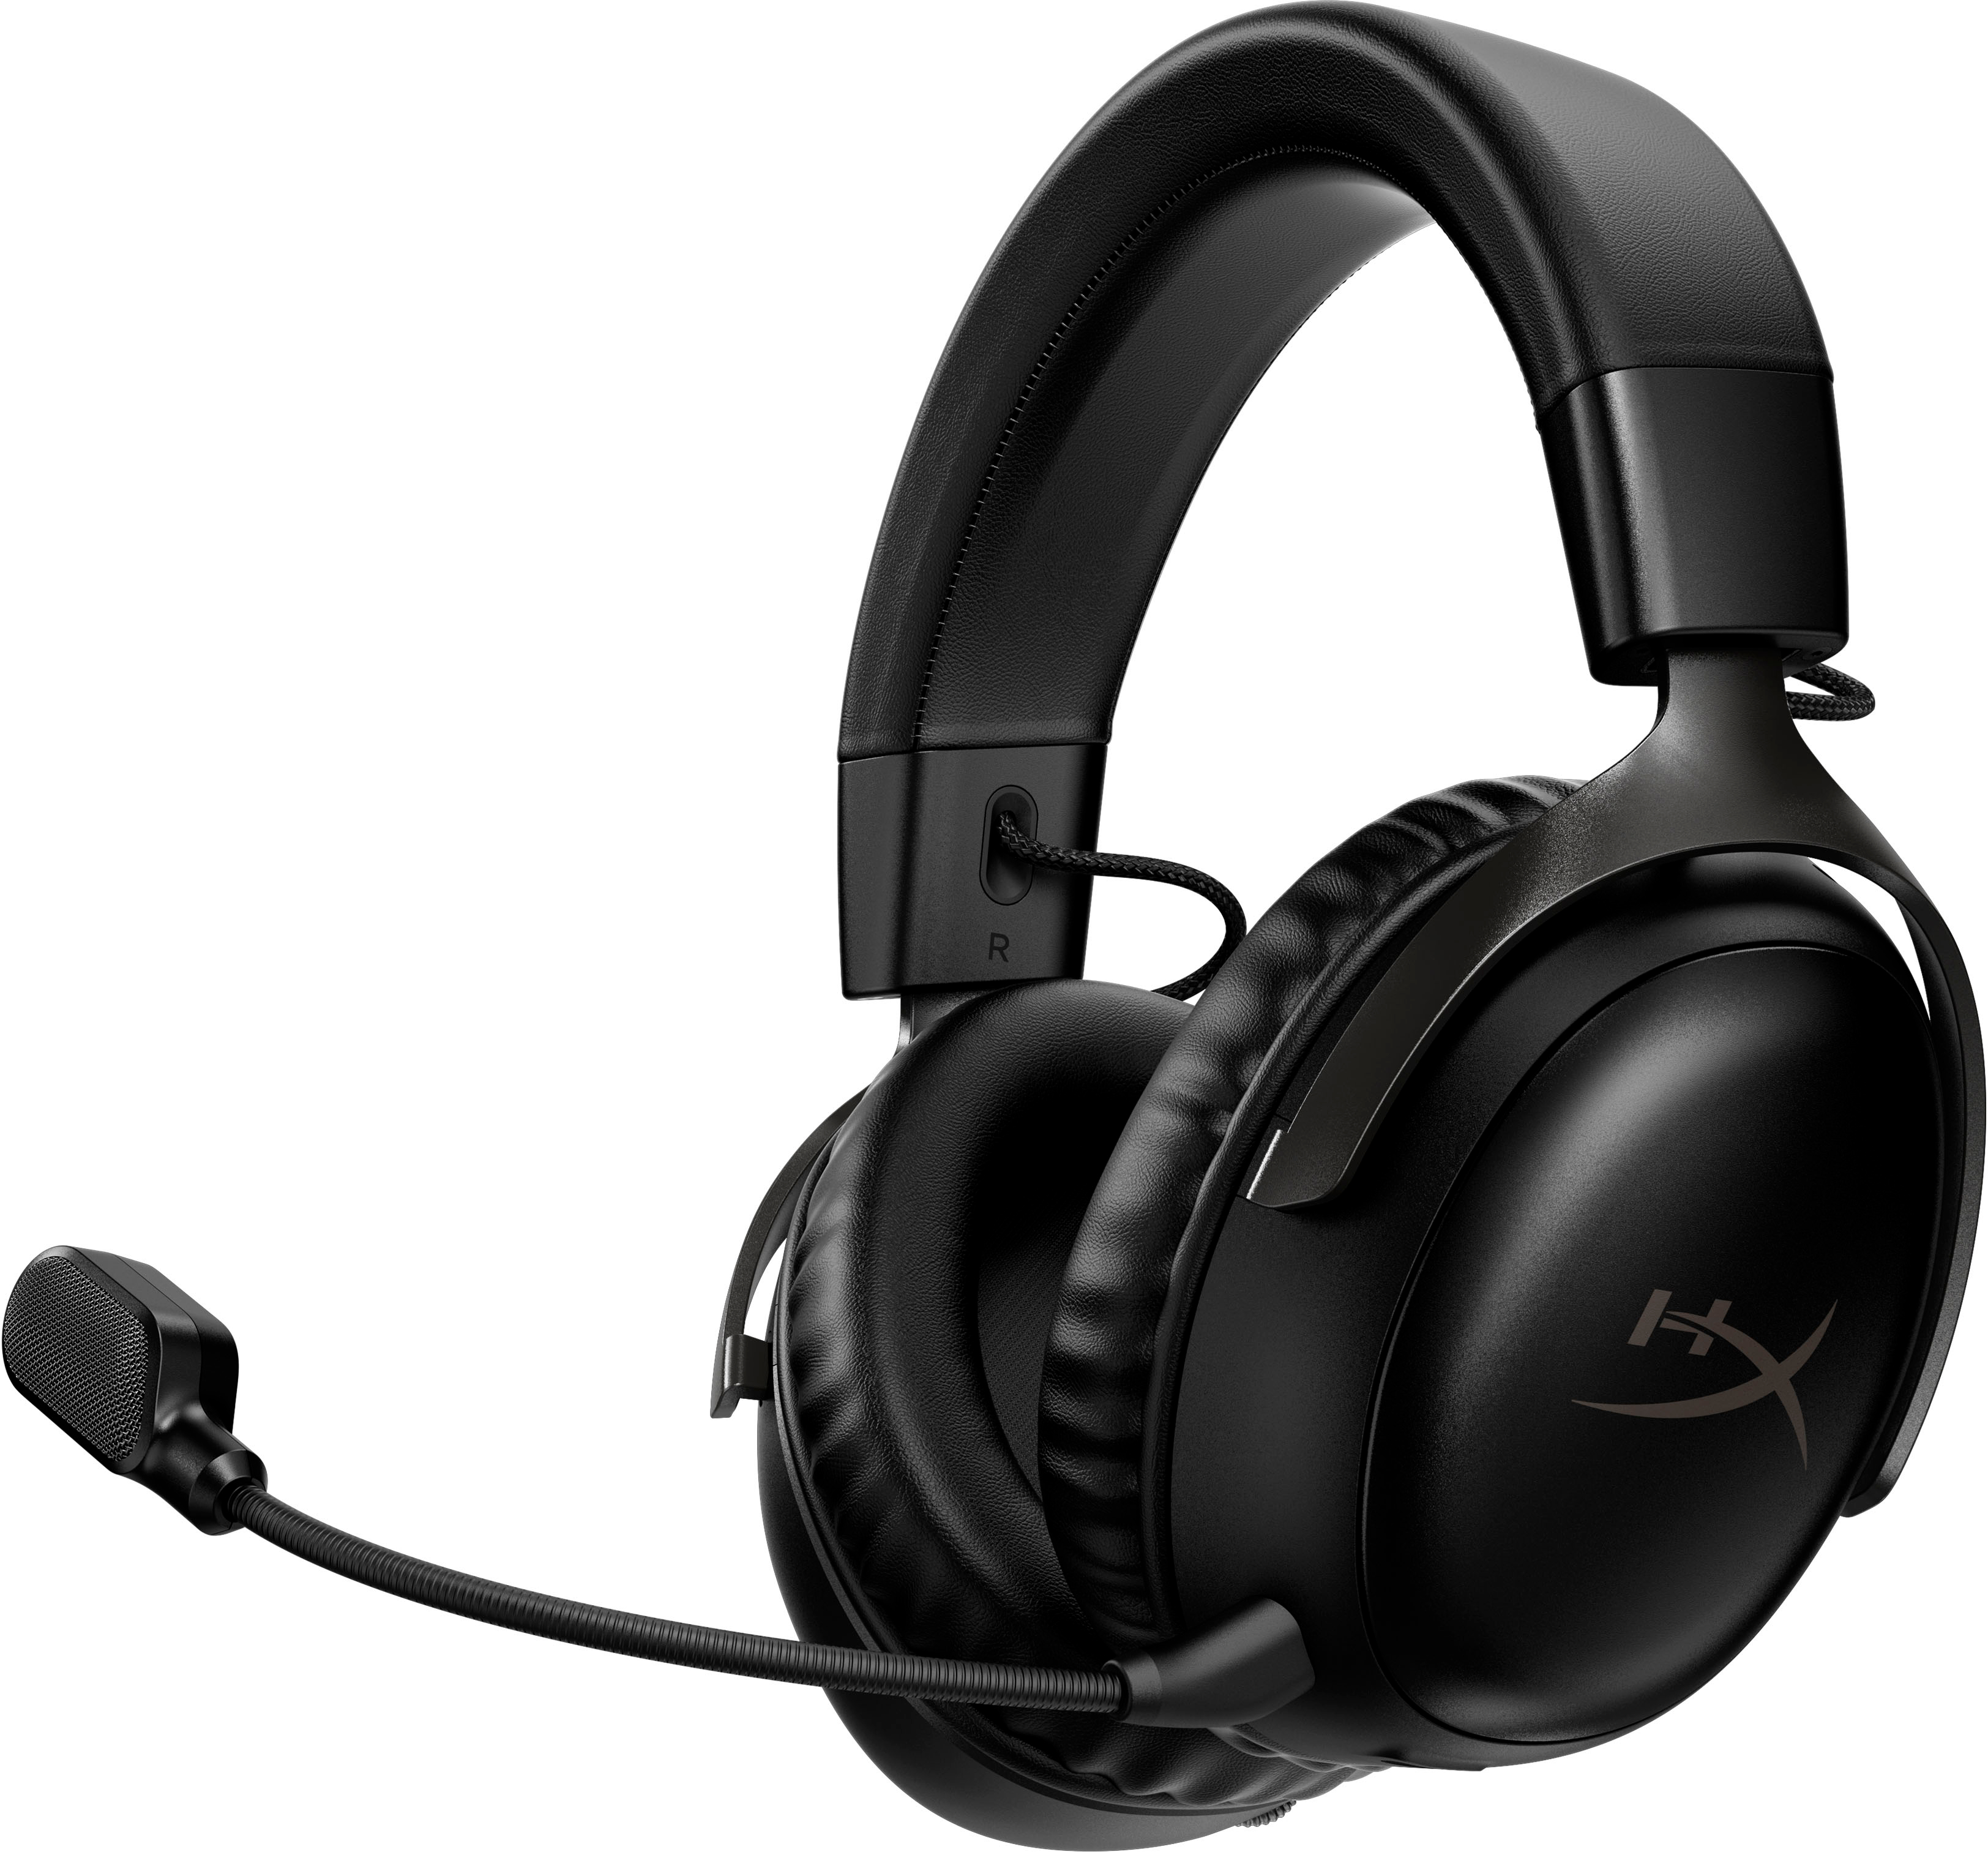  HyperX Cloud Flight – Wireless Gaming Headset for PS5 and PS4,  Up to 30-hour battery, Memory foam ear cushions and premium leatherette,  Noise-Cancelling Microphone with LED Mic Mute : Video Games